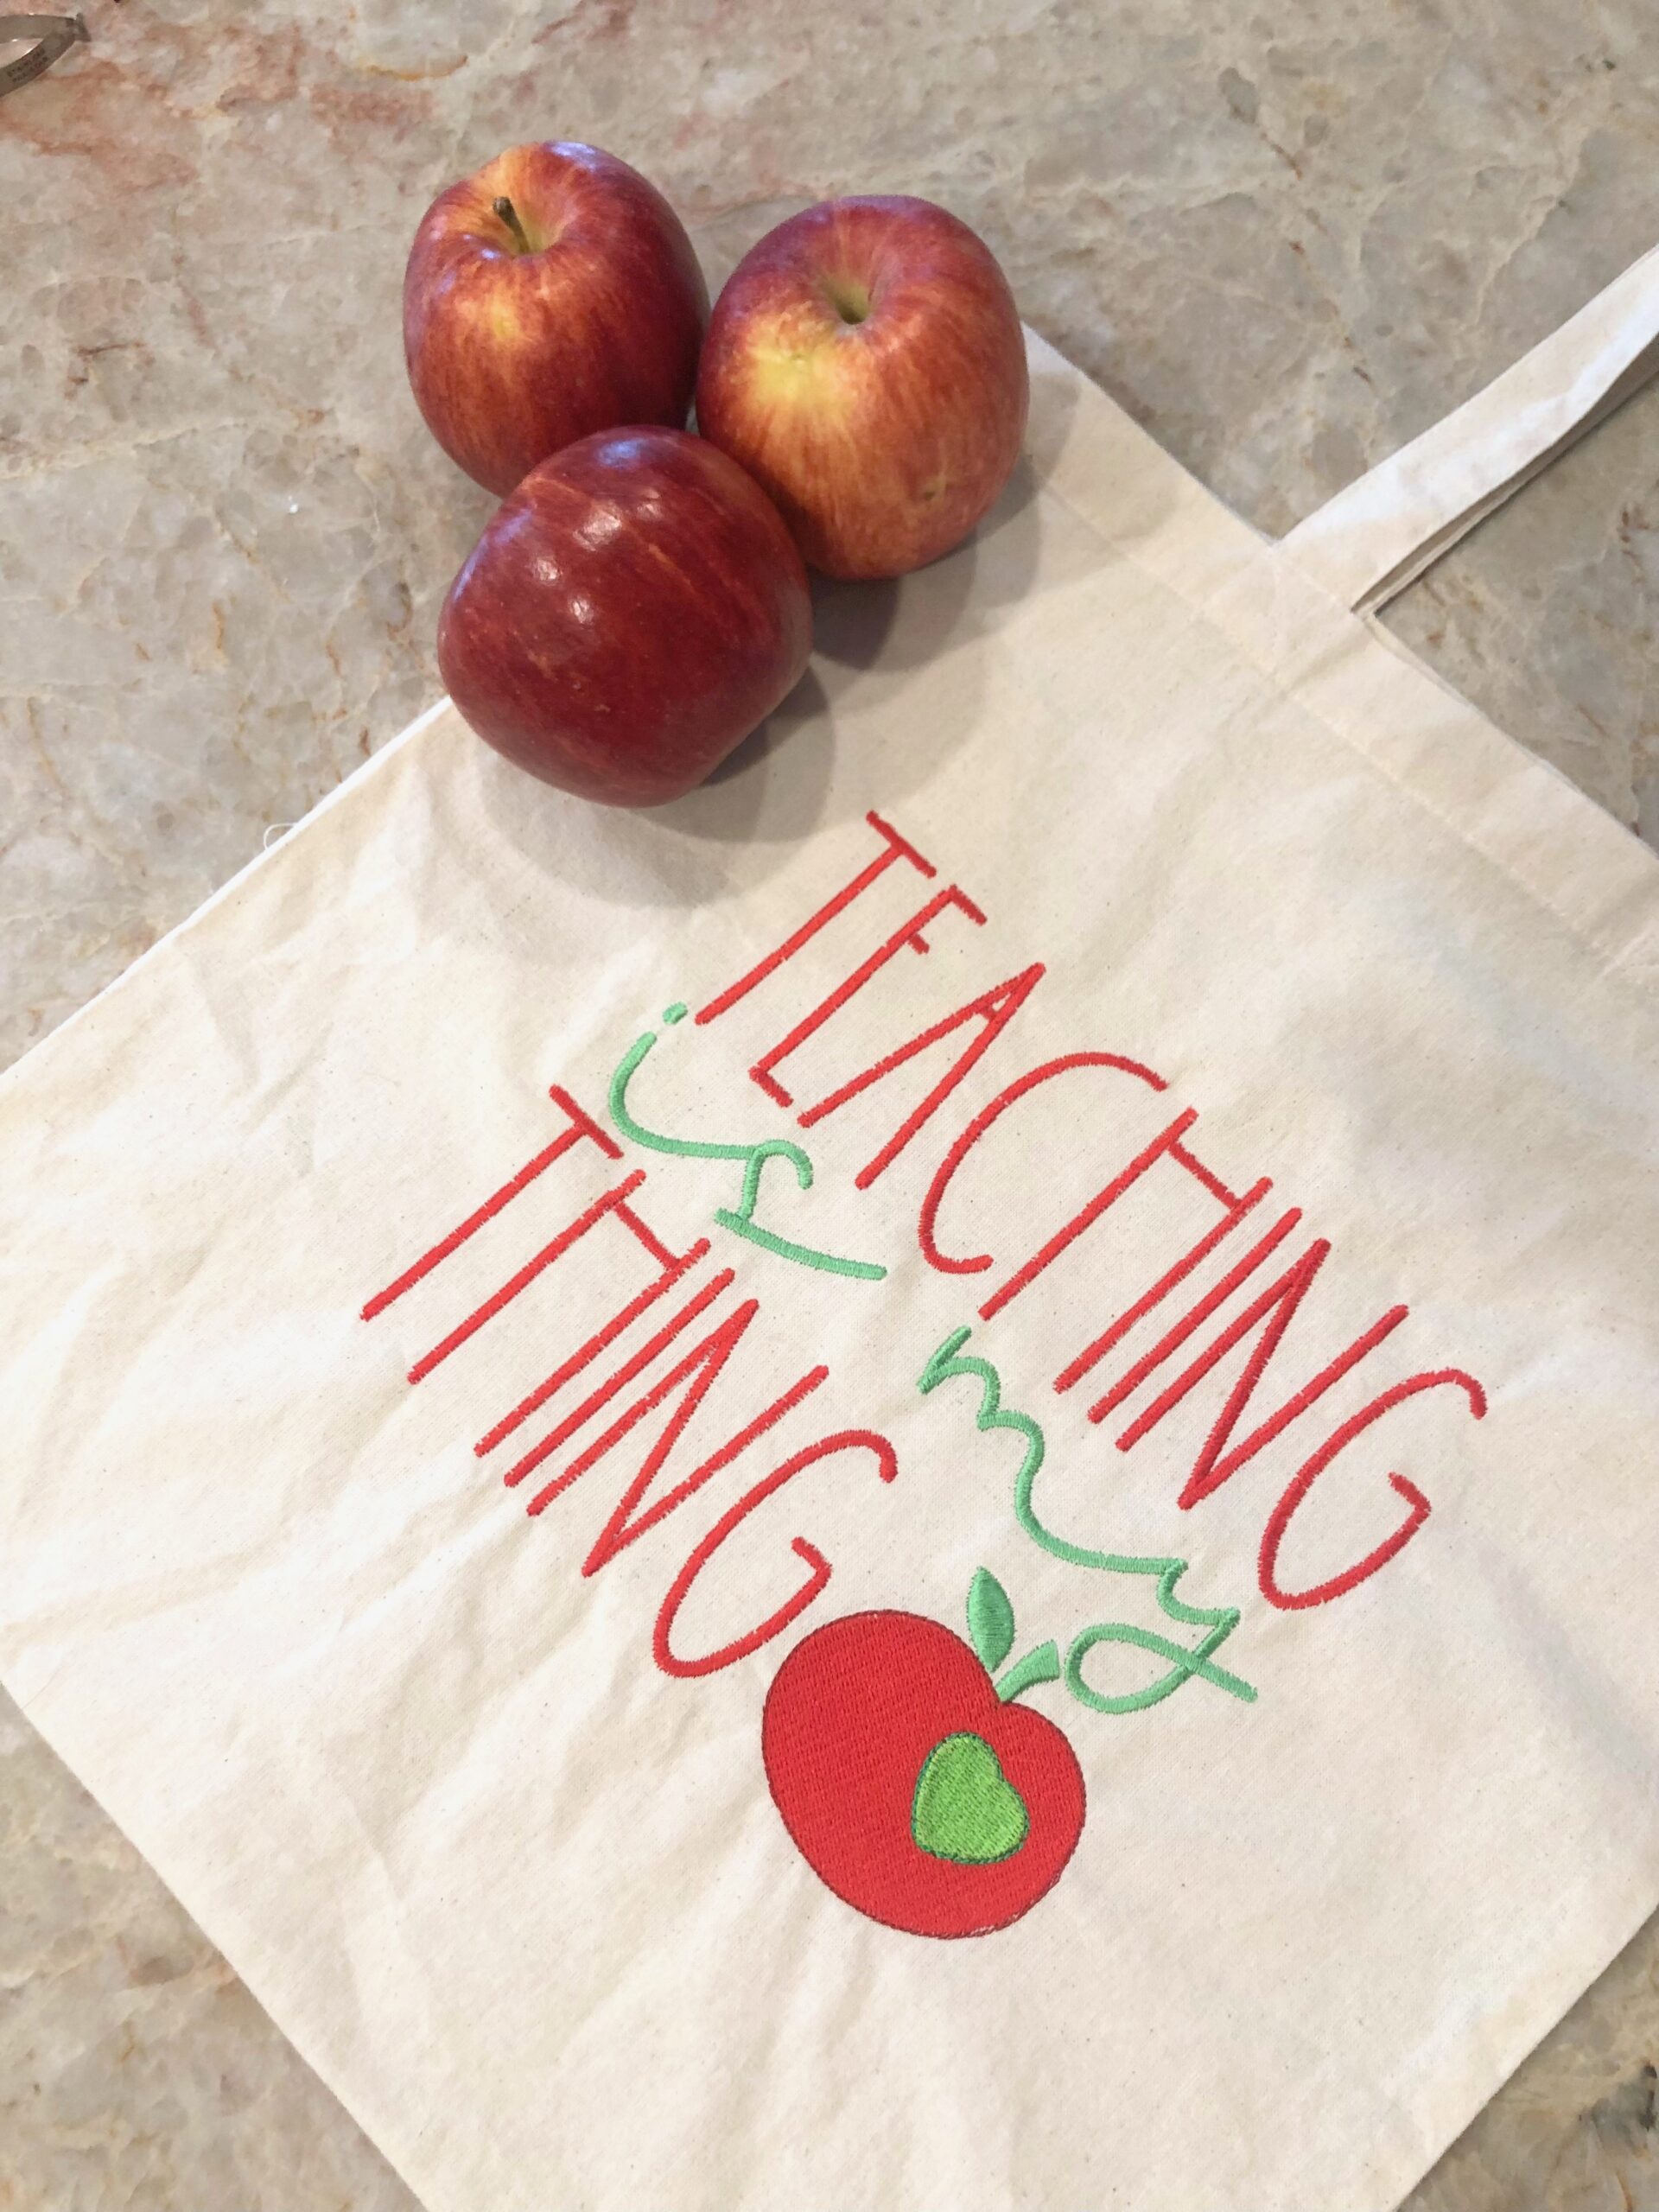 Embroider Blanks for Teacher Gifts - Sulky